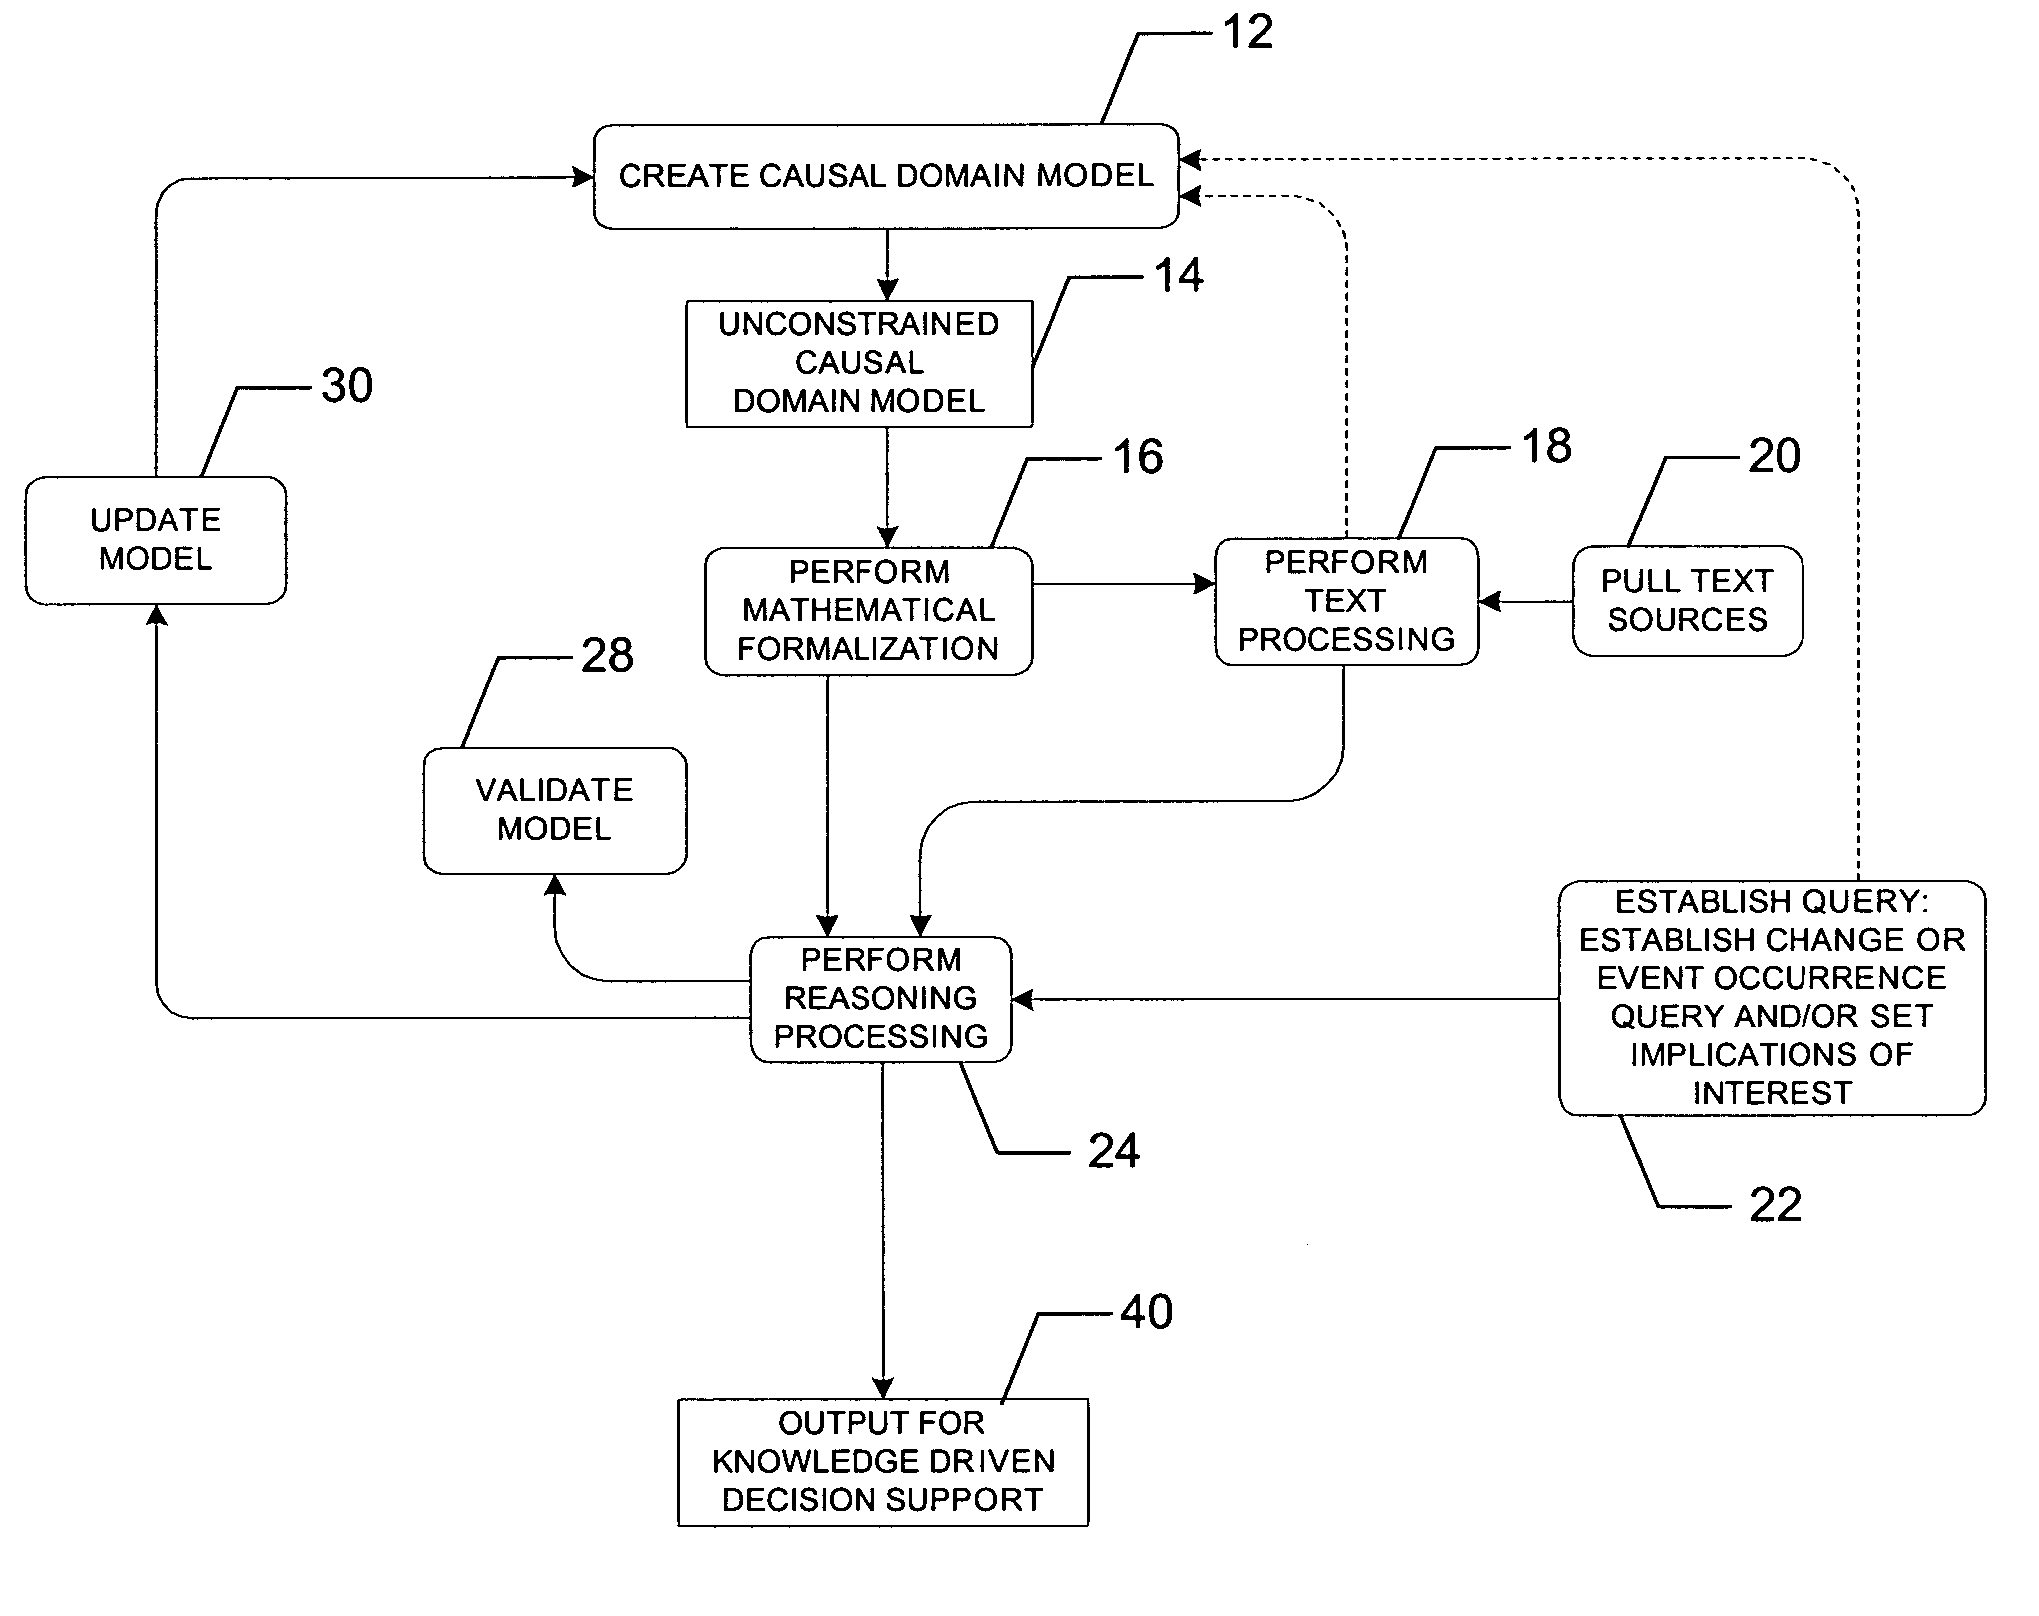 System, method, and computer program product for combination of cognitive causal models with reasoning and text processing for knowledge driven decision support